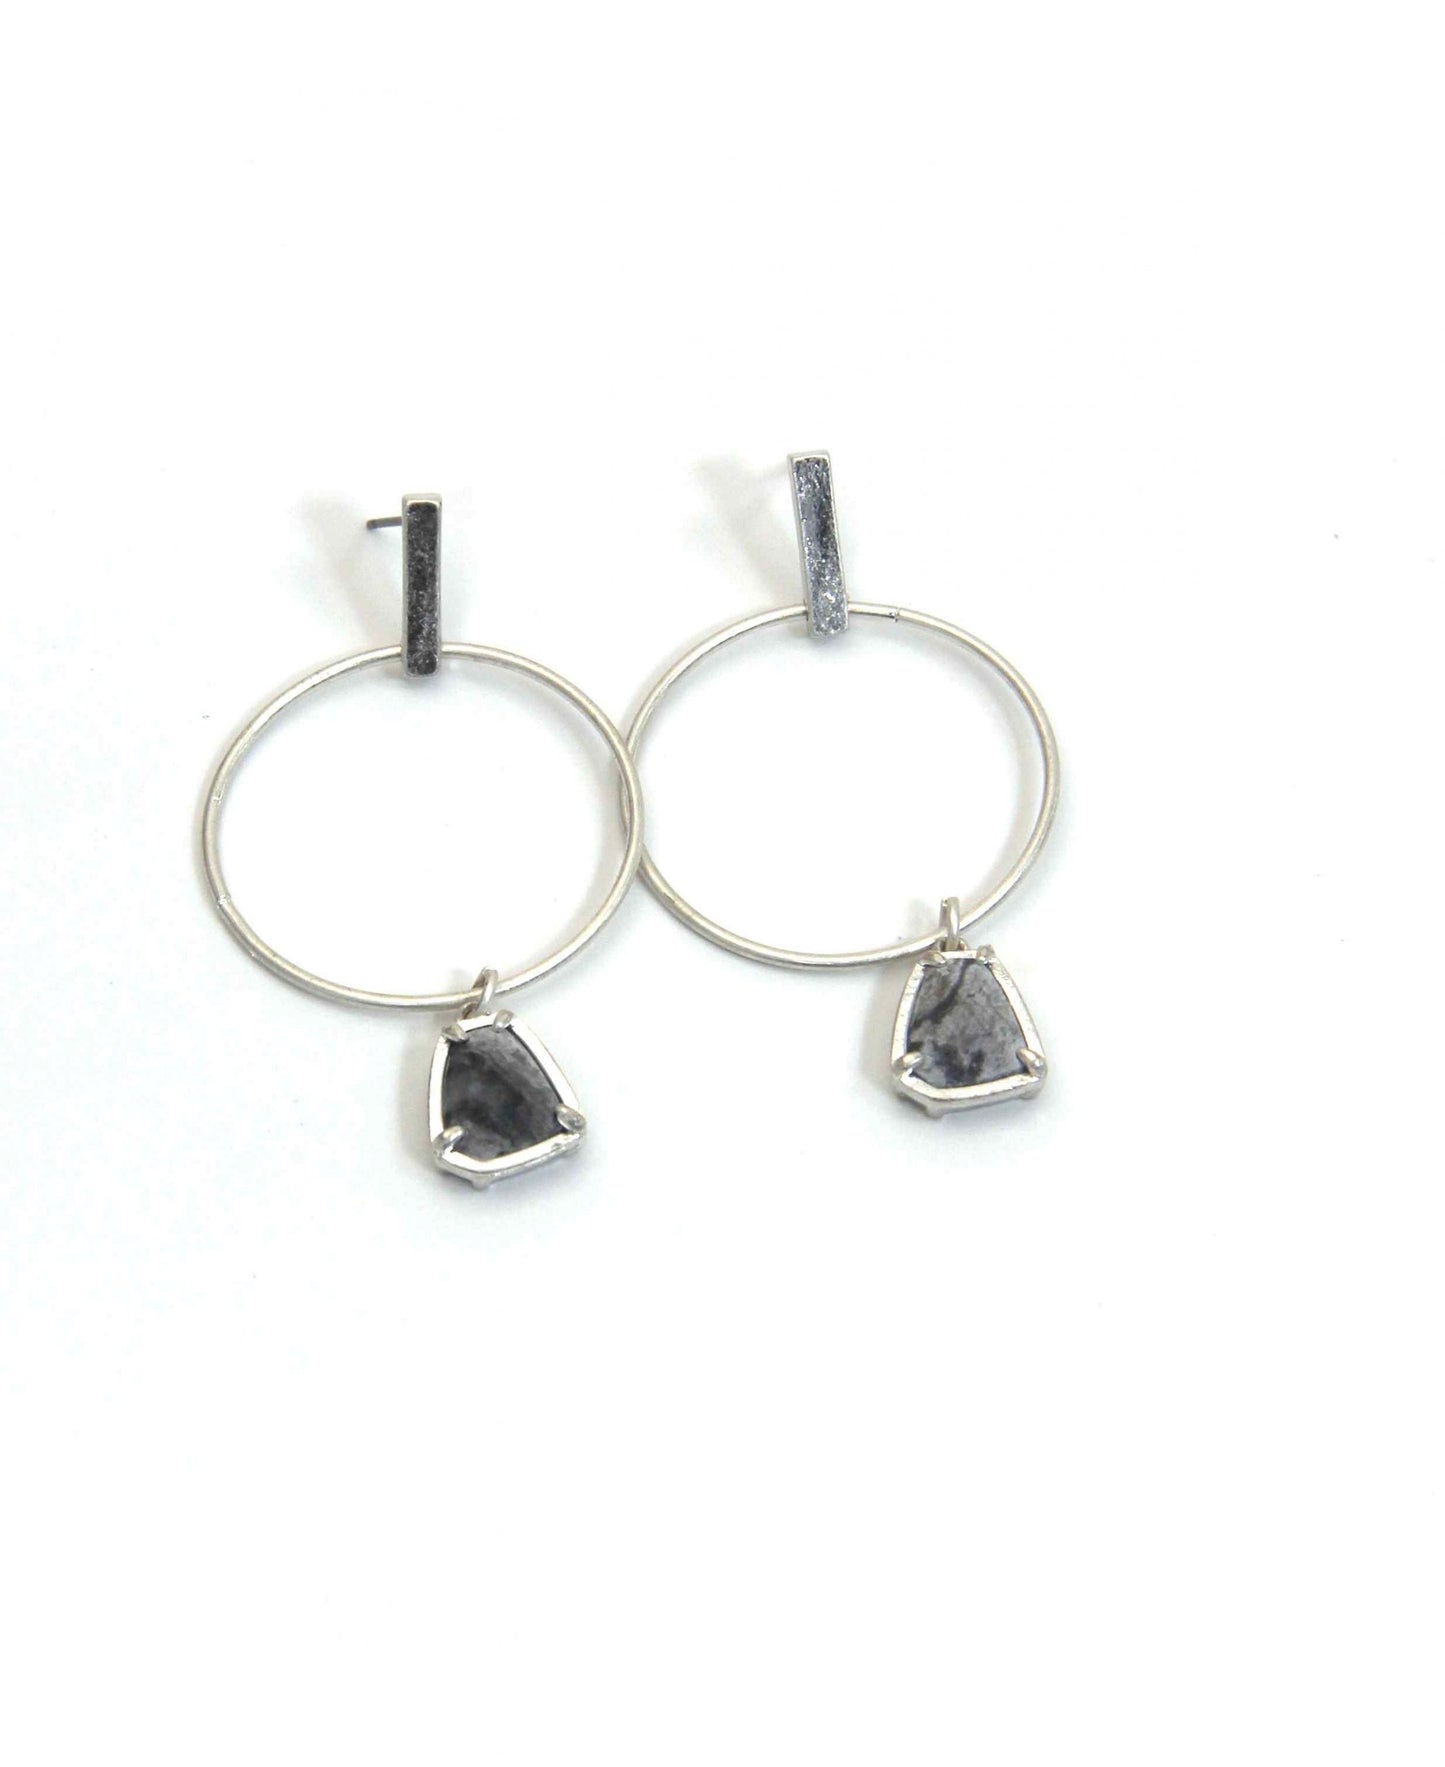 Silver Hoop Earring with Stone Pendant